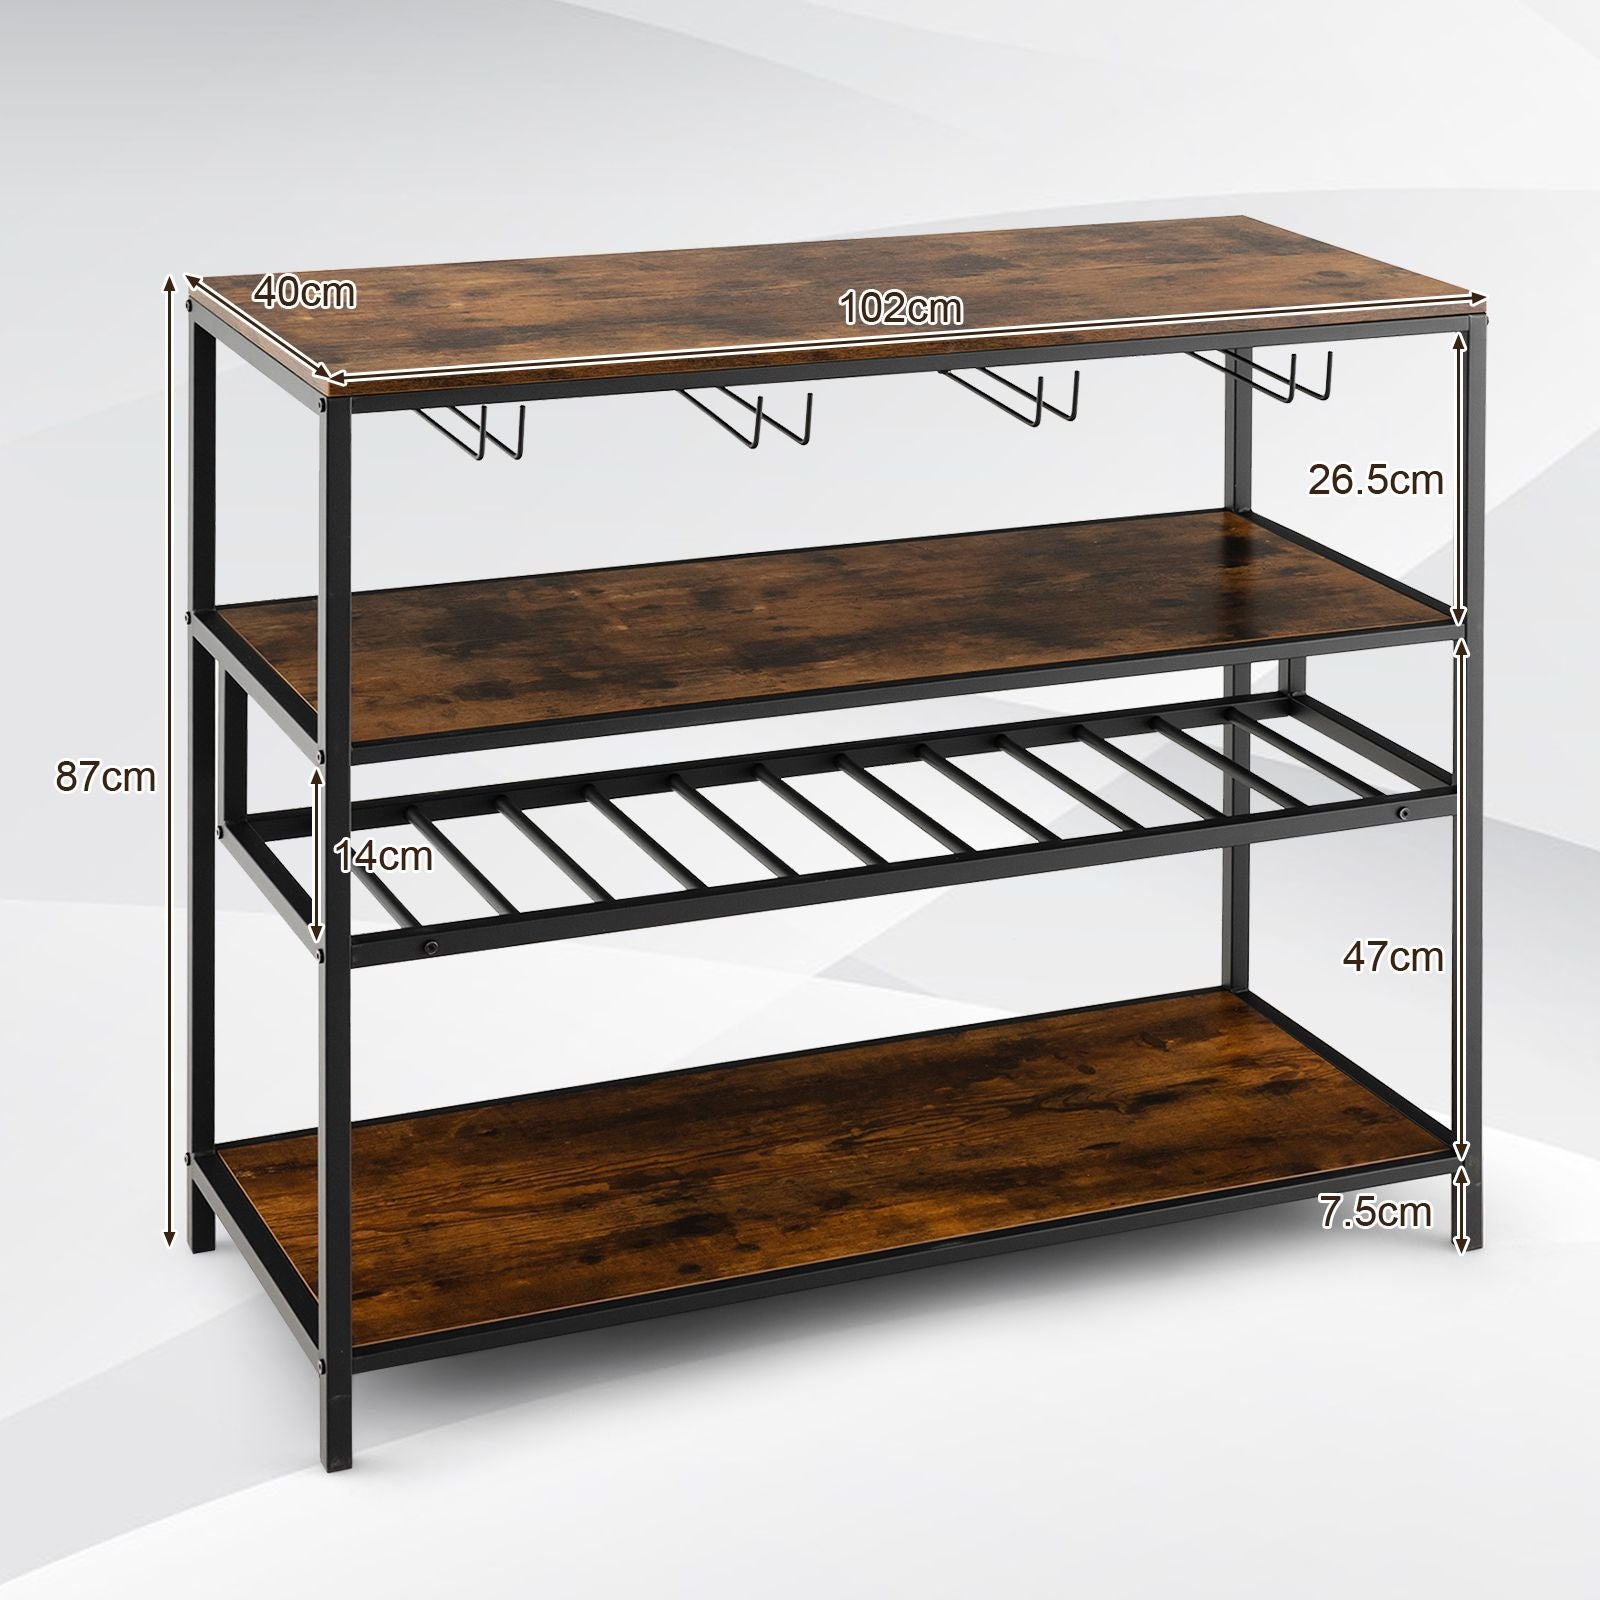 Industrial Bar Cabinet with Wine Rack & 4 Rows of Glass Holders